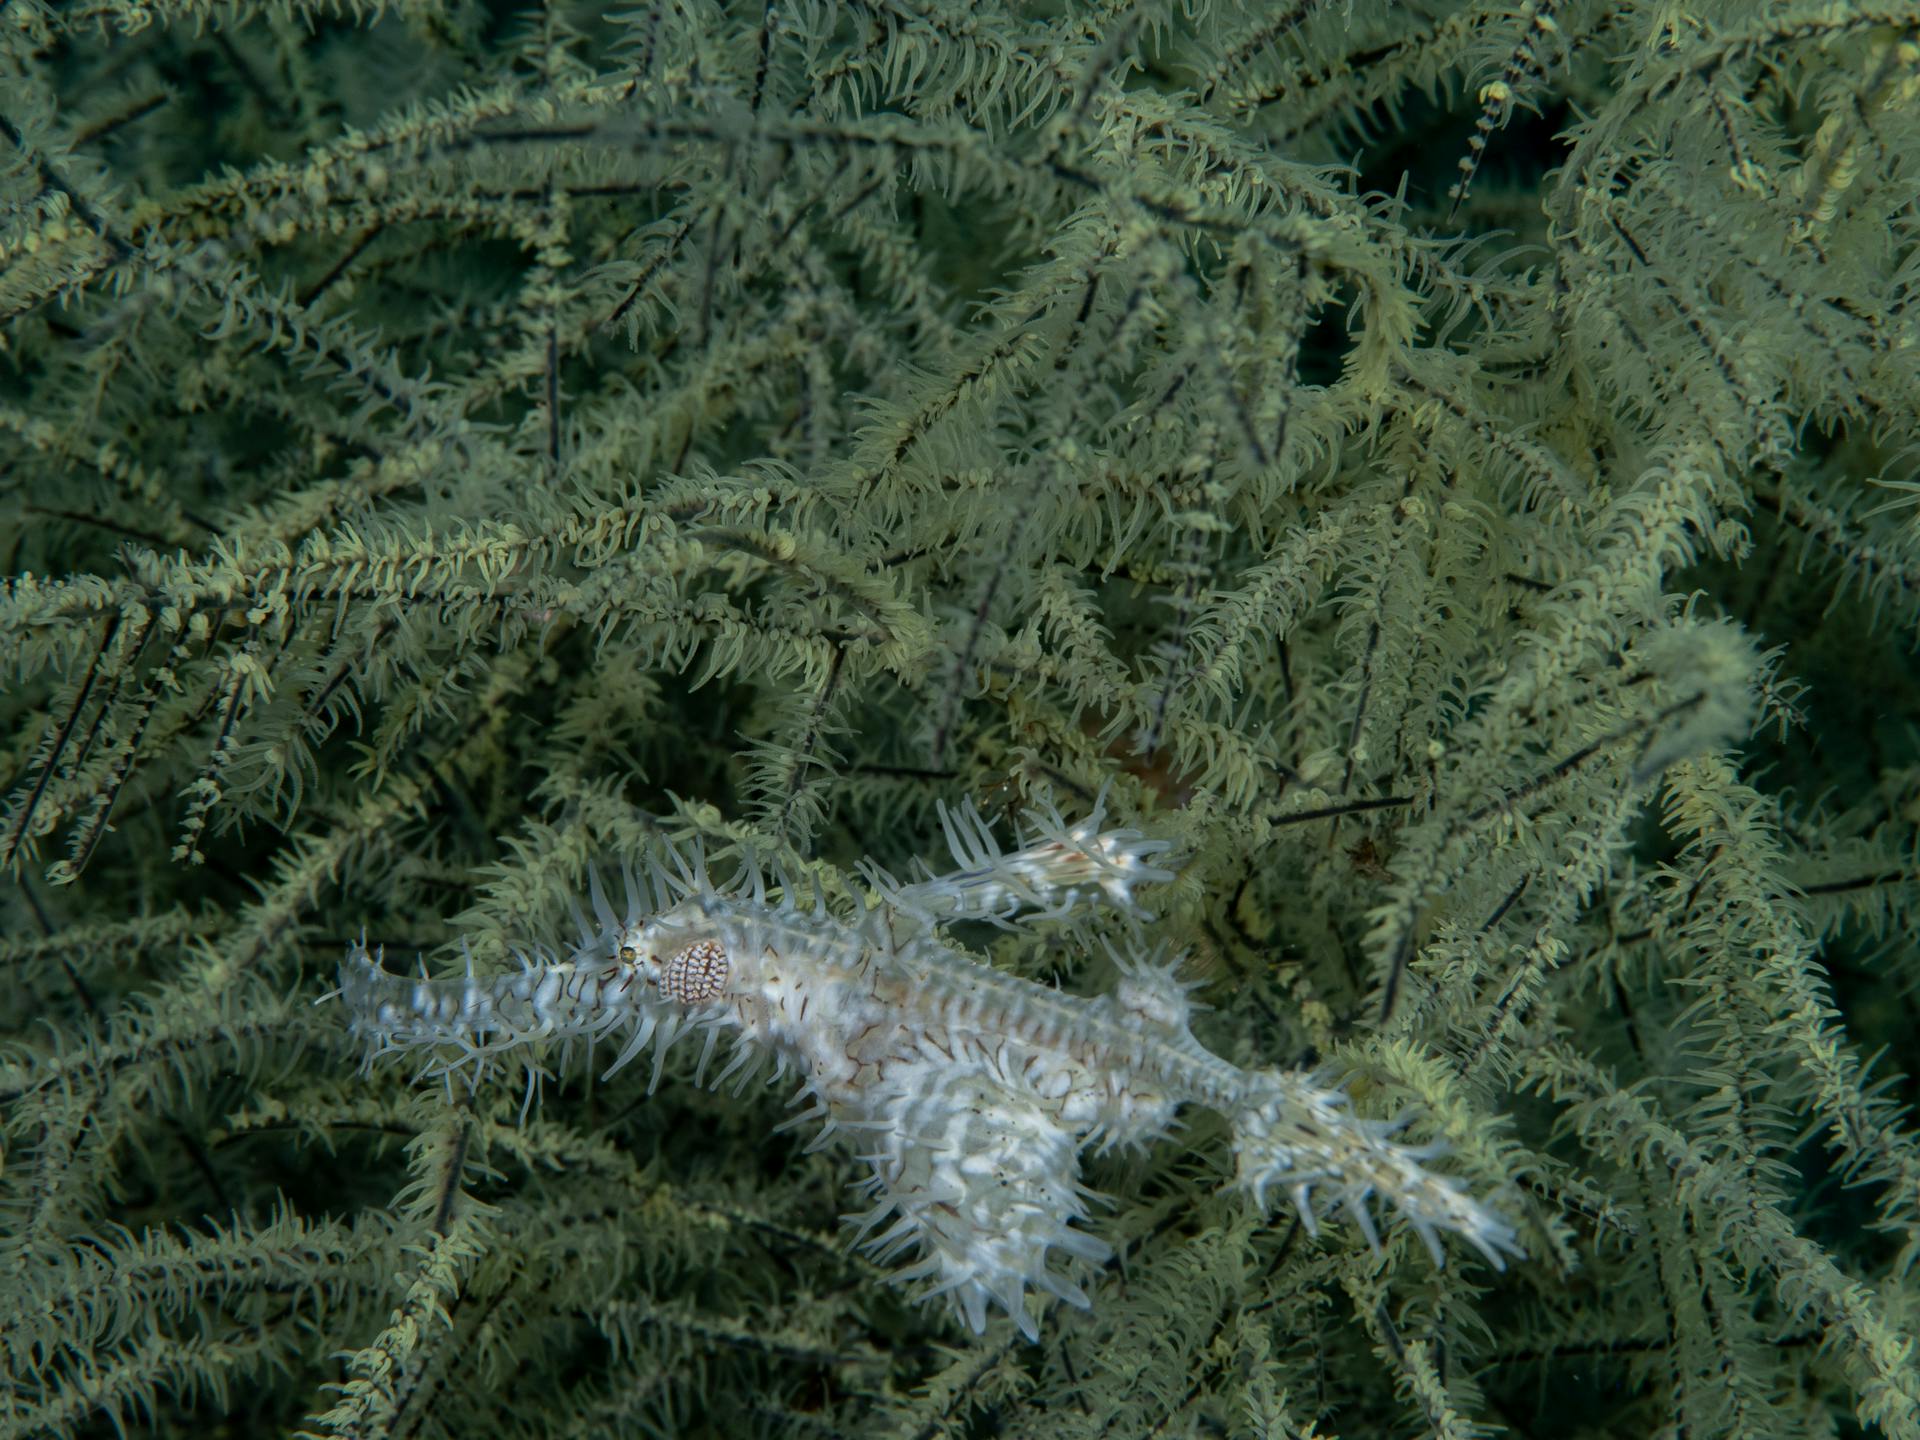 Ornage ghost pipefish